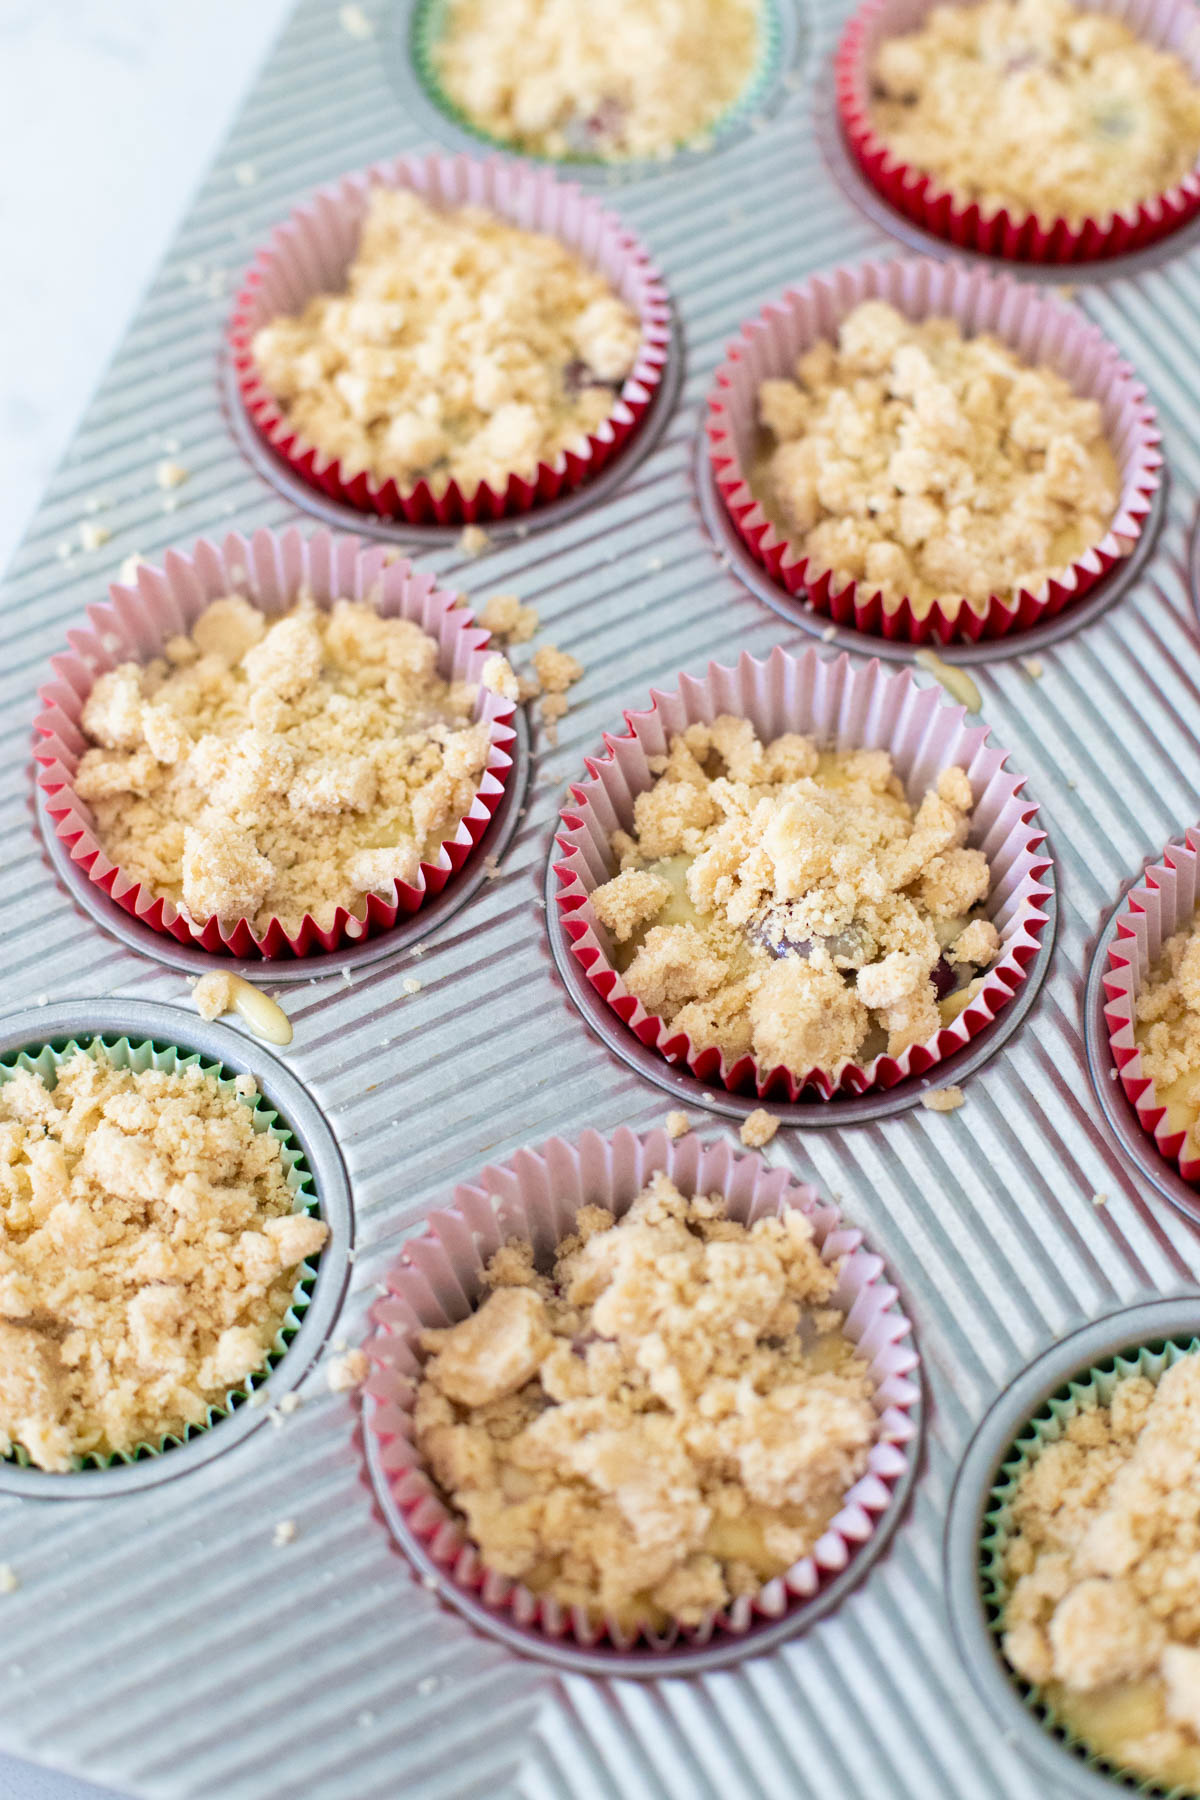 The streusel topping has been sprinkled over each muffin well.